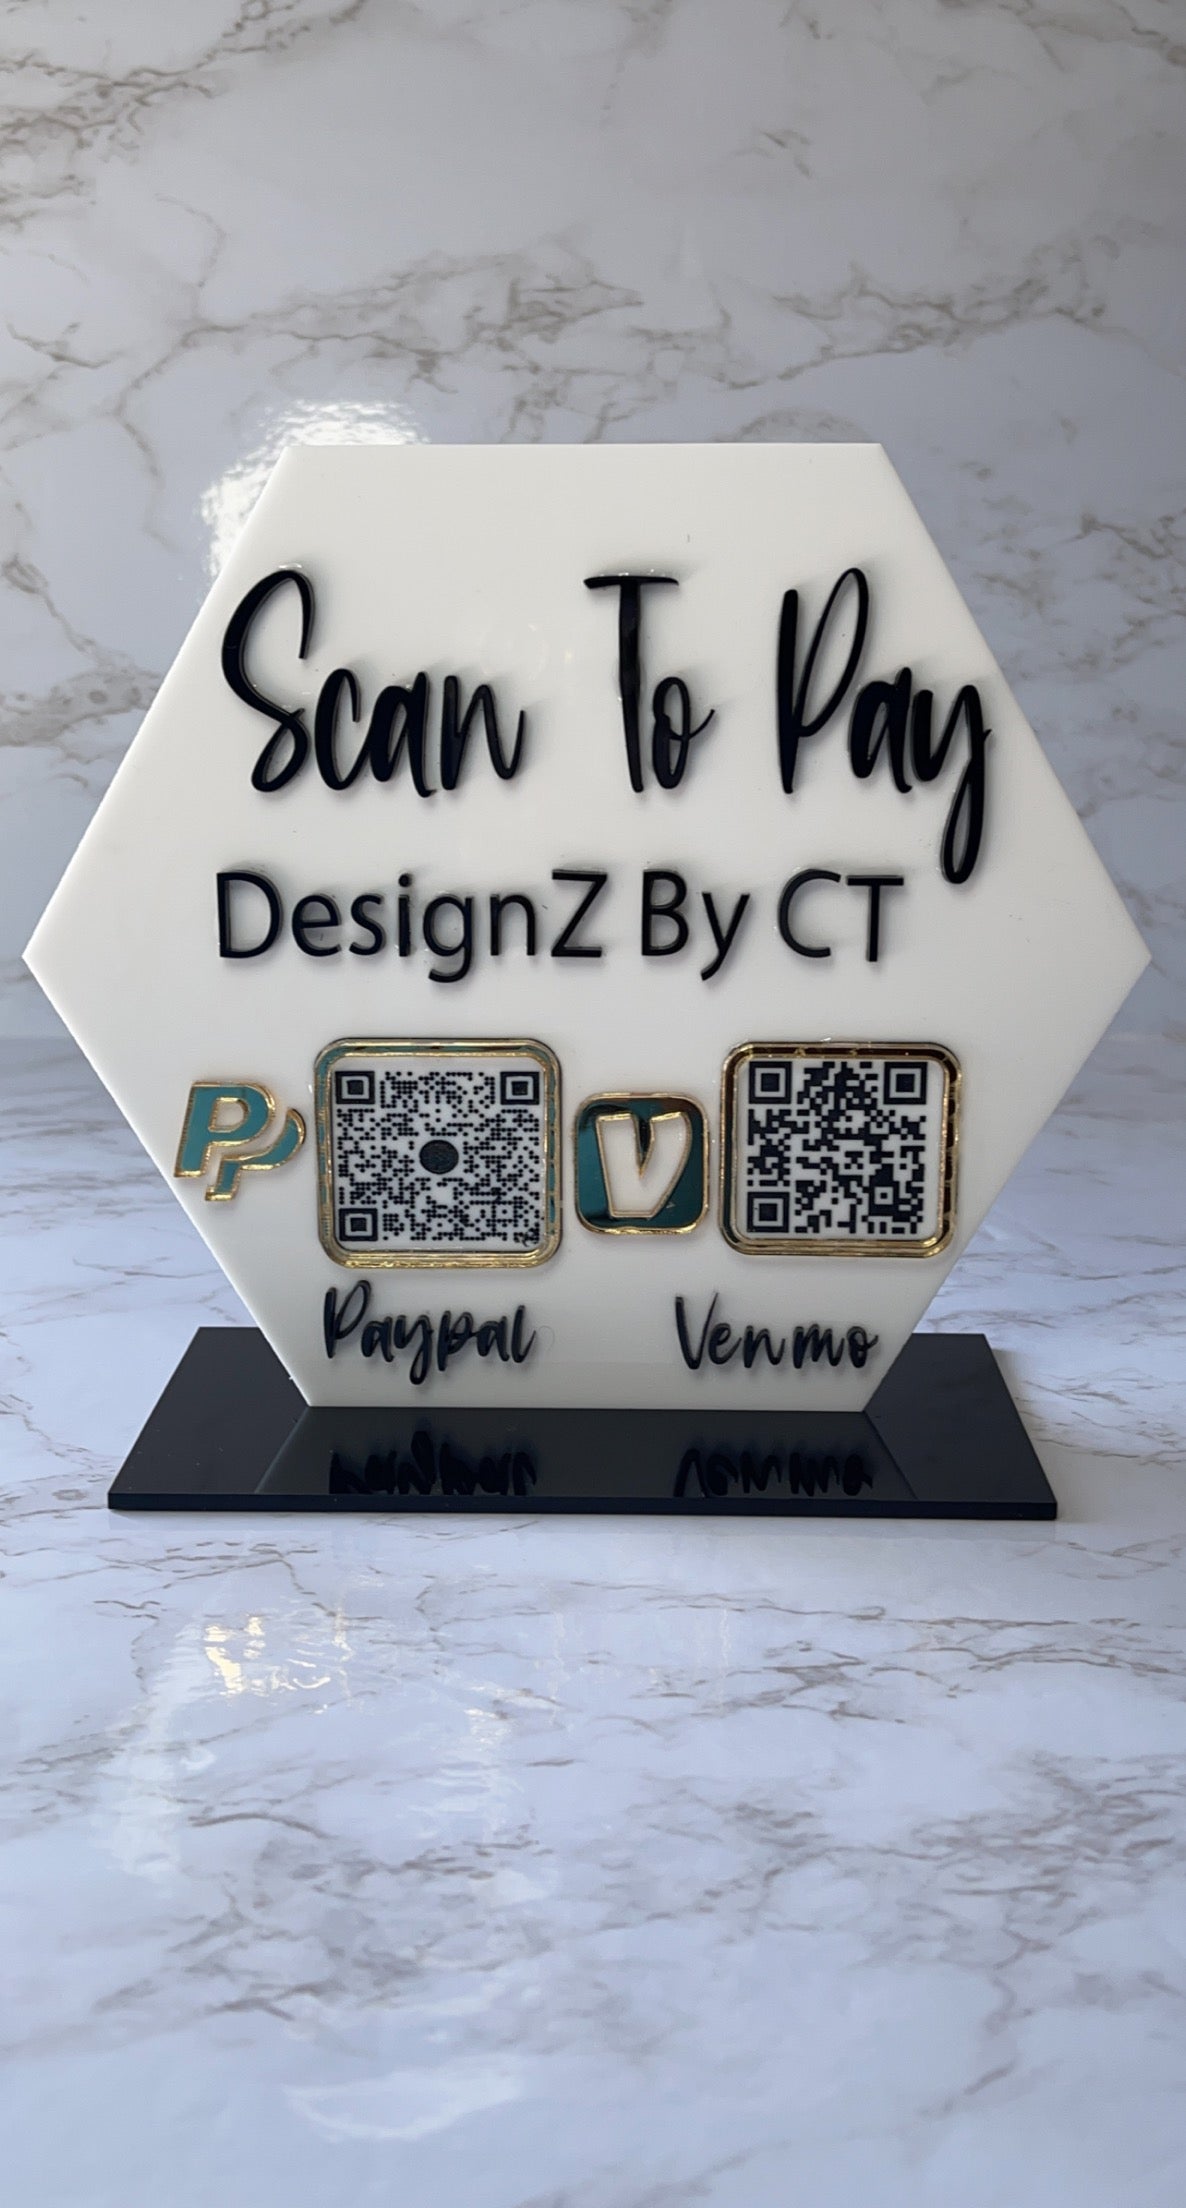 Double QR Code and social media signs (1 or 2 icon)